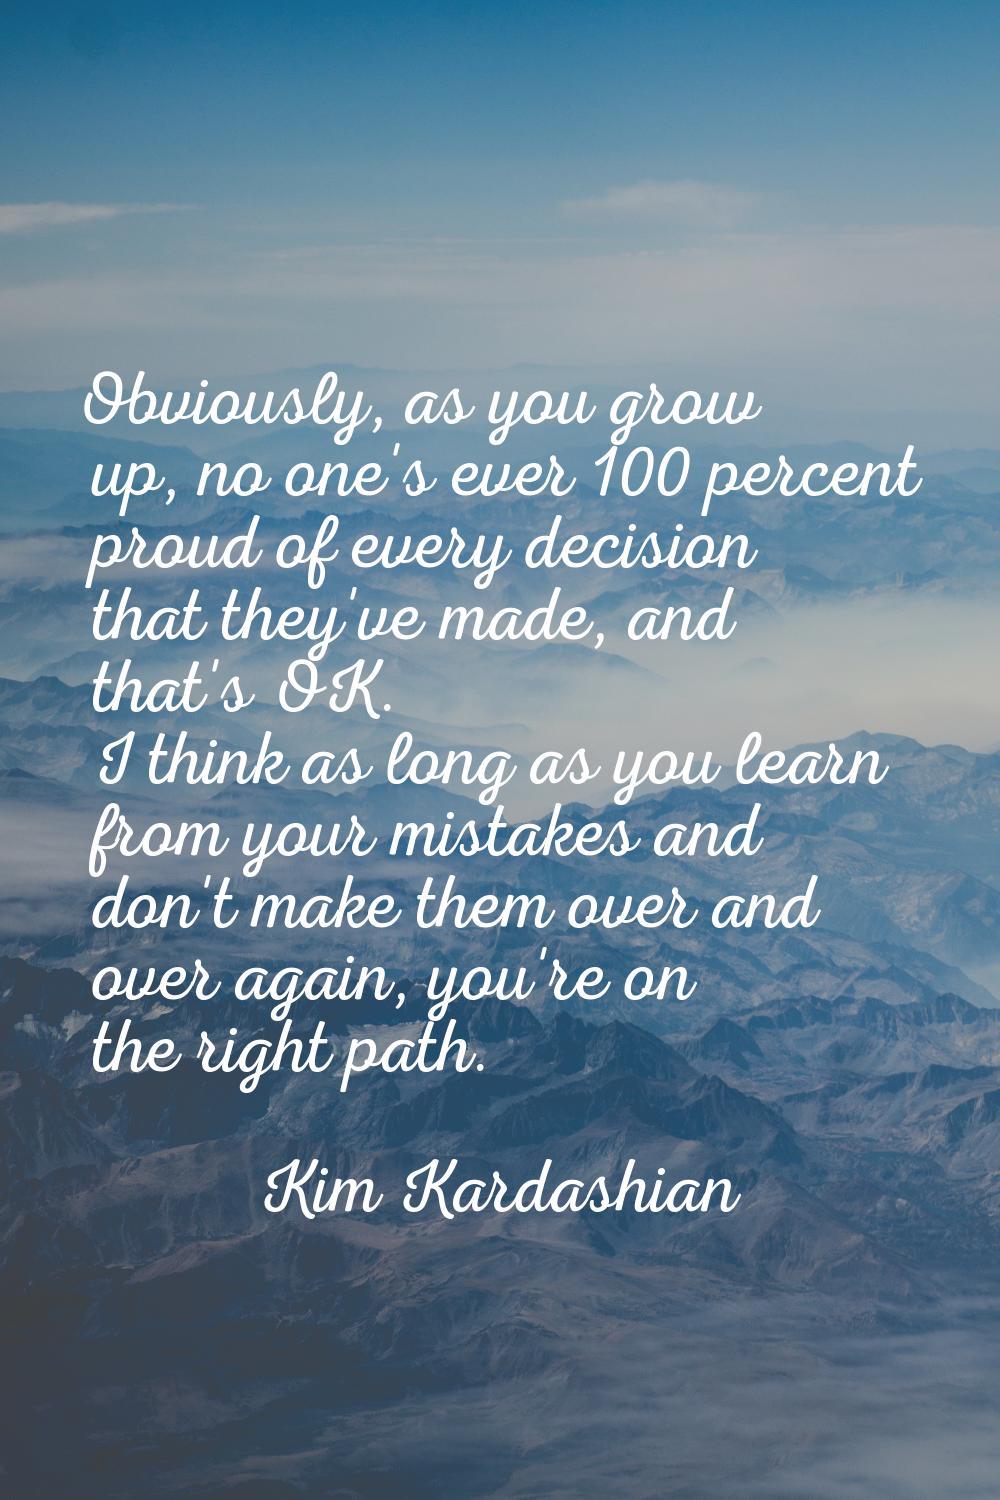 Obviously, as you grow up, no one's ever 100 percent proud of every decision that they've made, and